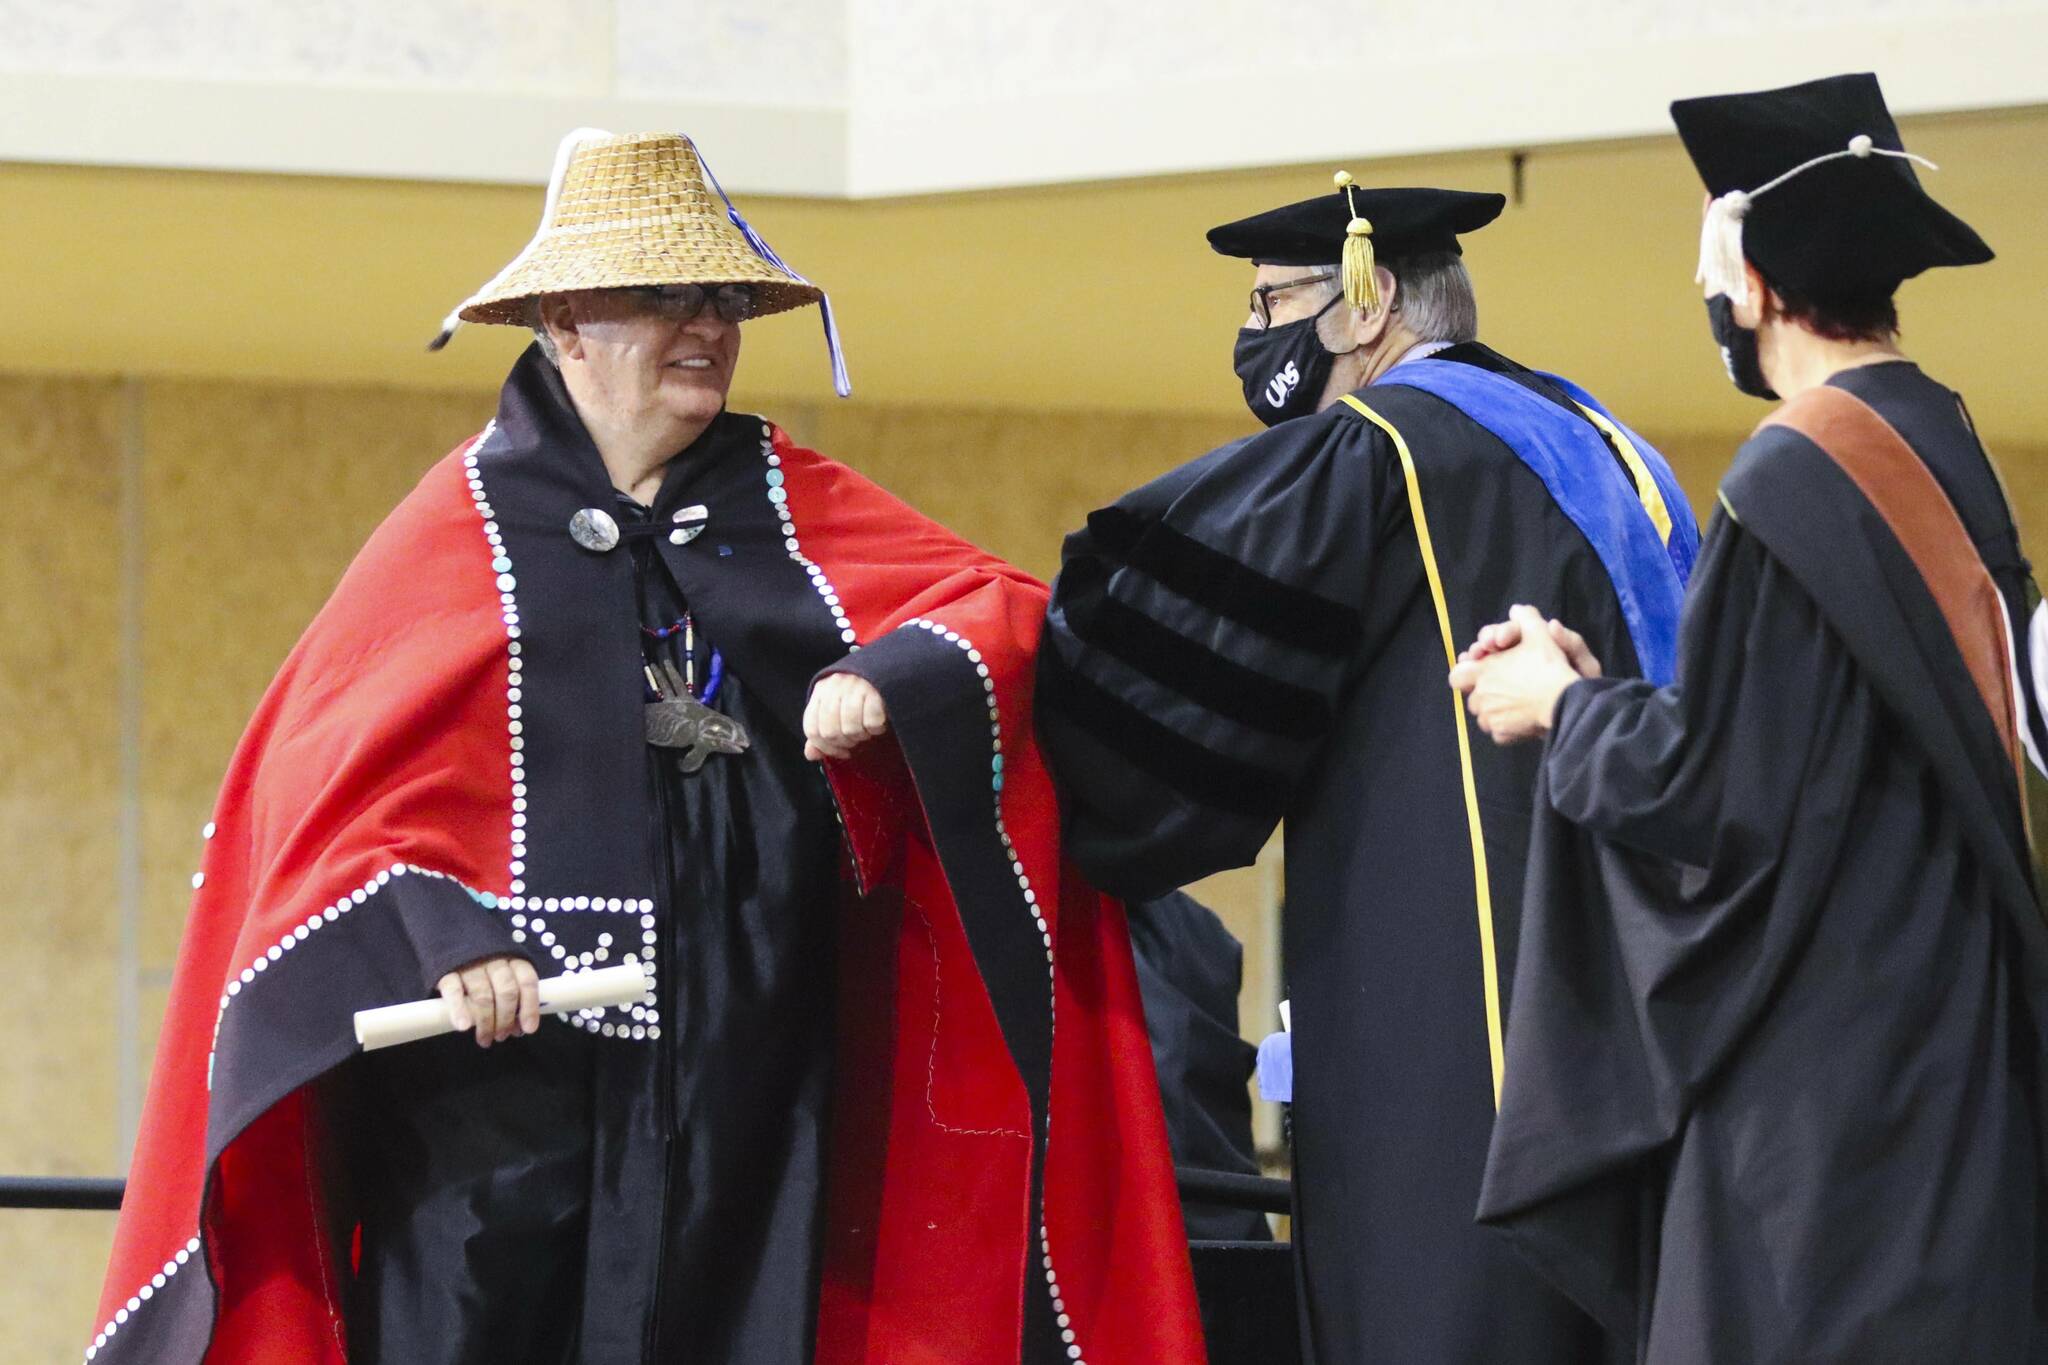 Robert Yates, left, receives his certificate for Indigenous language teaching during the commencement ceremony for University of Alaska Southeast on May 1, 2022. (Michael S. Lockett / Juneau Empire)